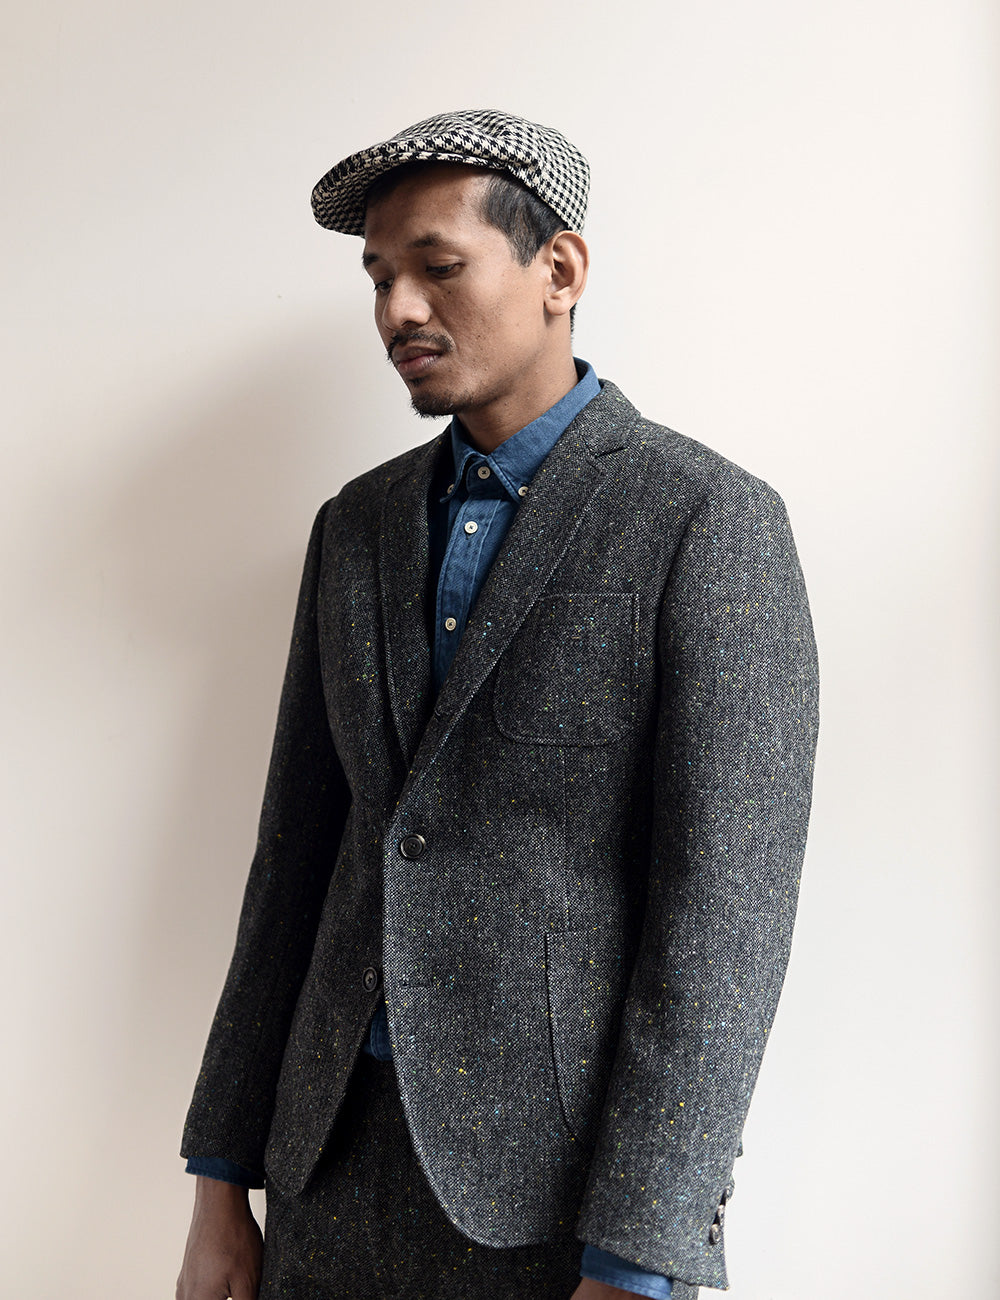 Model wears Donegal tweed unstructured blazer, chambray shirt, and houndstooth hat.